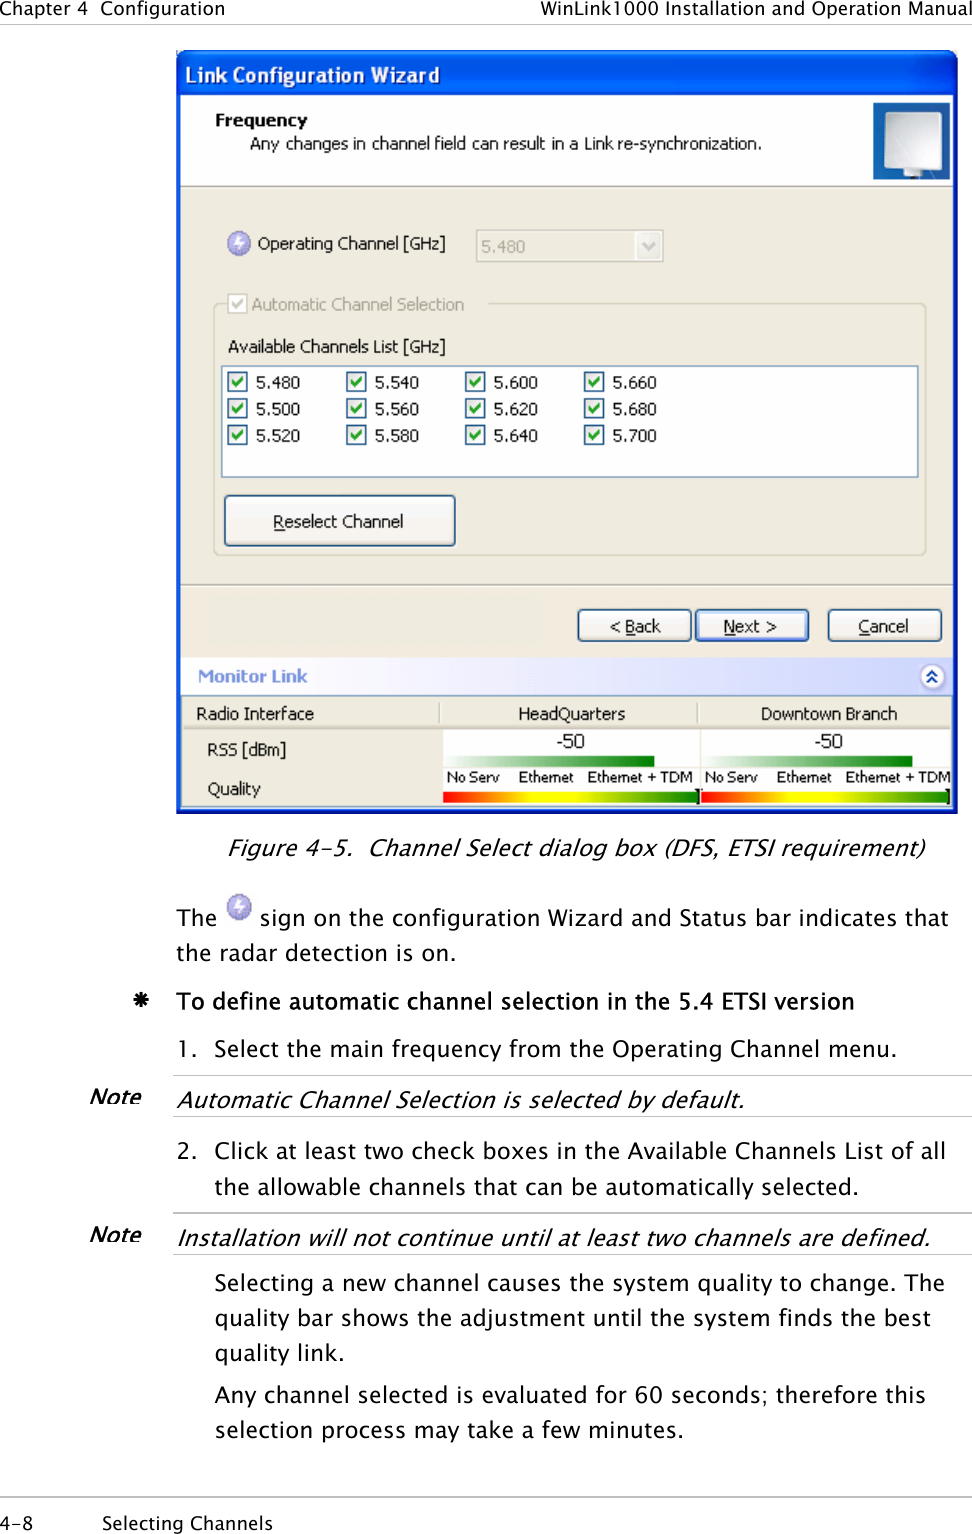 Chapter  4  Configuration  WinLink1000 Installation and Operation Manual  Figure  4-5.  Channel Select dialog box (DFS, ETSI requirement) The  sign on the configuration Wizard and Status bar indicates that the radar detection is on. Æ To define automatic channel selection in the 5.4 ETSI version 1. Select the main frequency from the Operating Channel menu.  NoteAutomatic Channel Selection is selected by default.  2. Click at least two check boxes in the Available Channels List of all the allowable channels that can be automatically selected.  NoteInstallation will not continue until at least two channels are defined.  Selecting a new channel causes the system quality to change. The quality bar shows the adjustment until the system finds the best quality link.  Any channel selected is evaluated for 60 seconds; therefore this selection process may take a few minutes. 4-8 Selecting Channels  